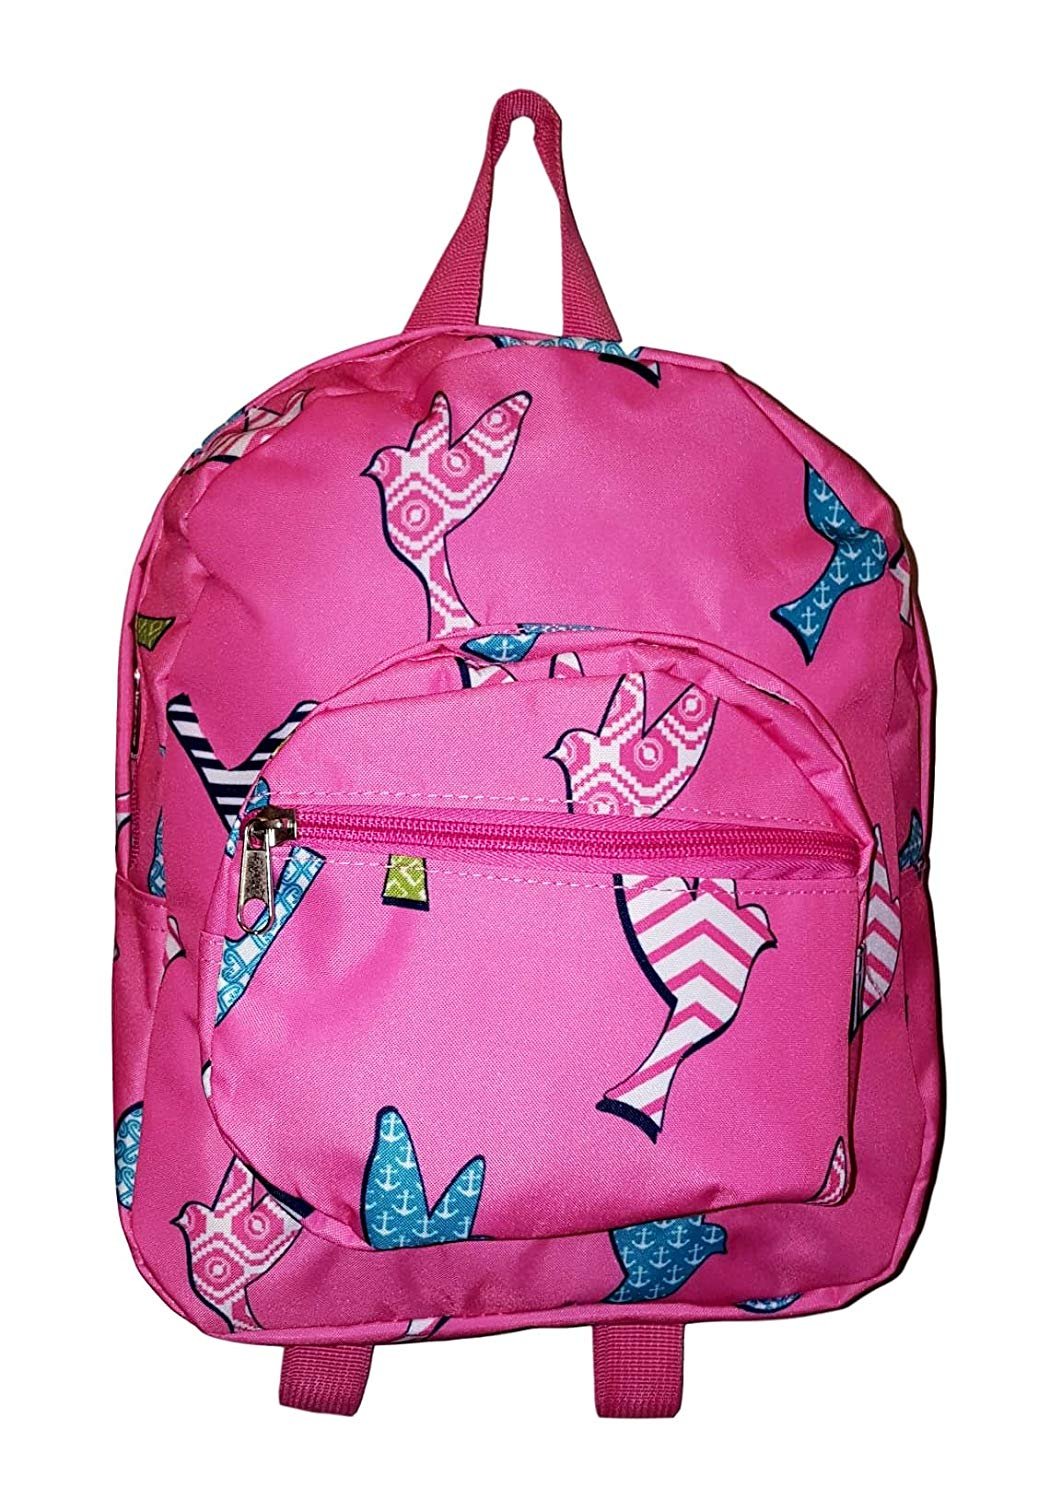 11-inch Mini Backpack Purse, Zipper Front Pockets Teen Child Pink Bird Print - image 2 of 3